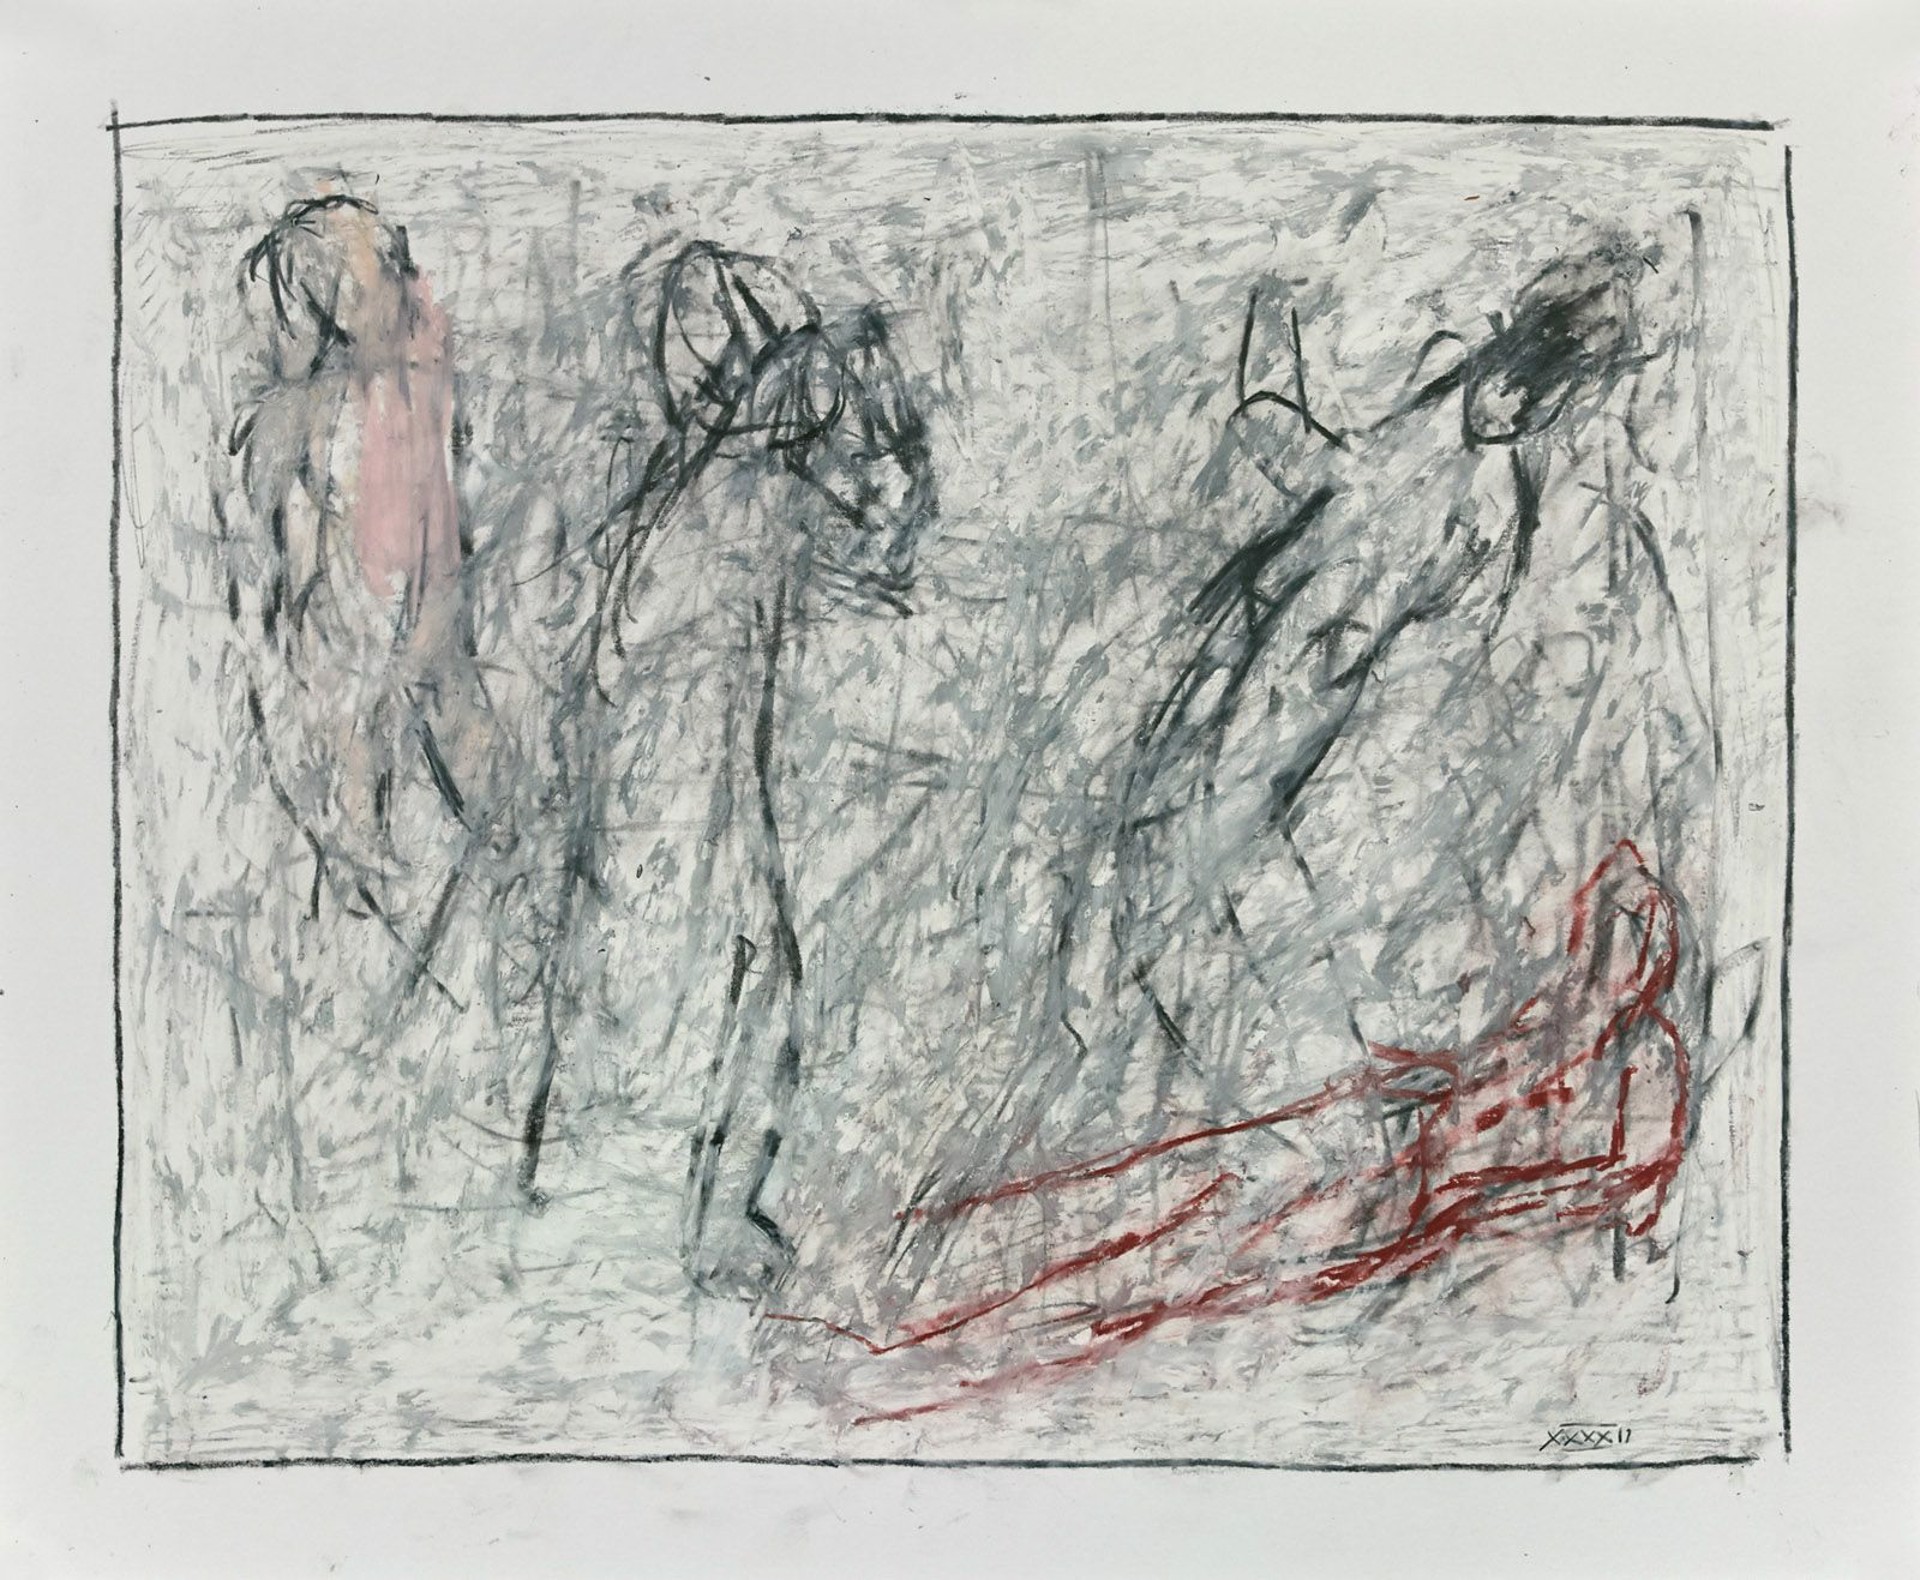 Drawings from Mt Gretna: XLII by Thaddeus Radell